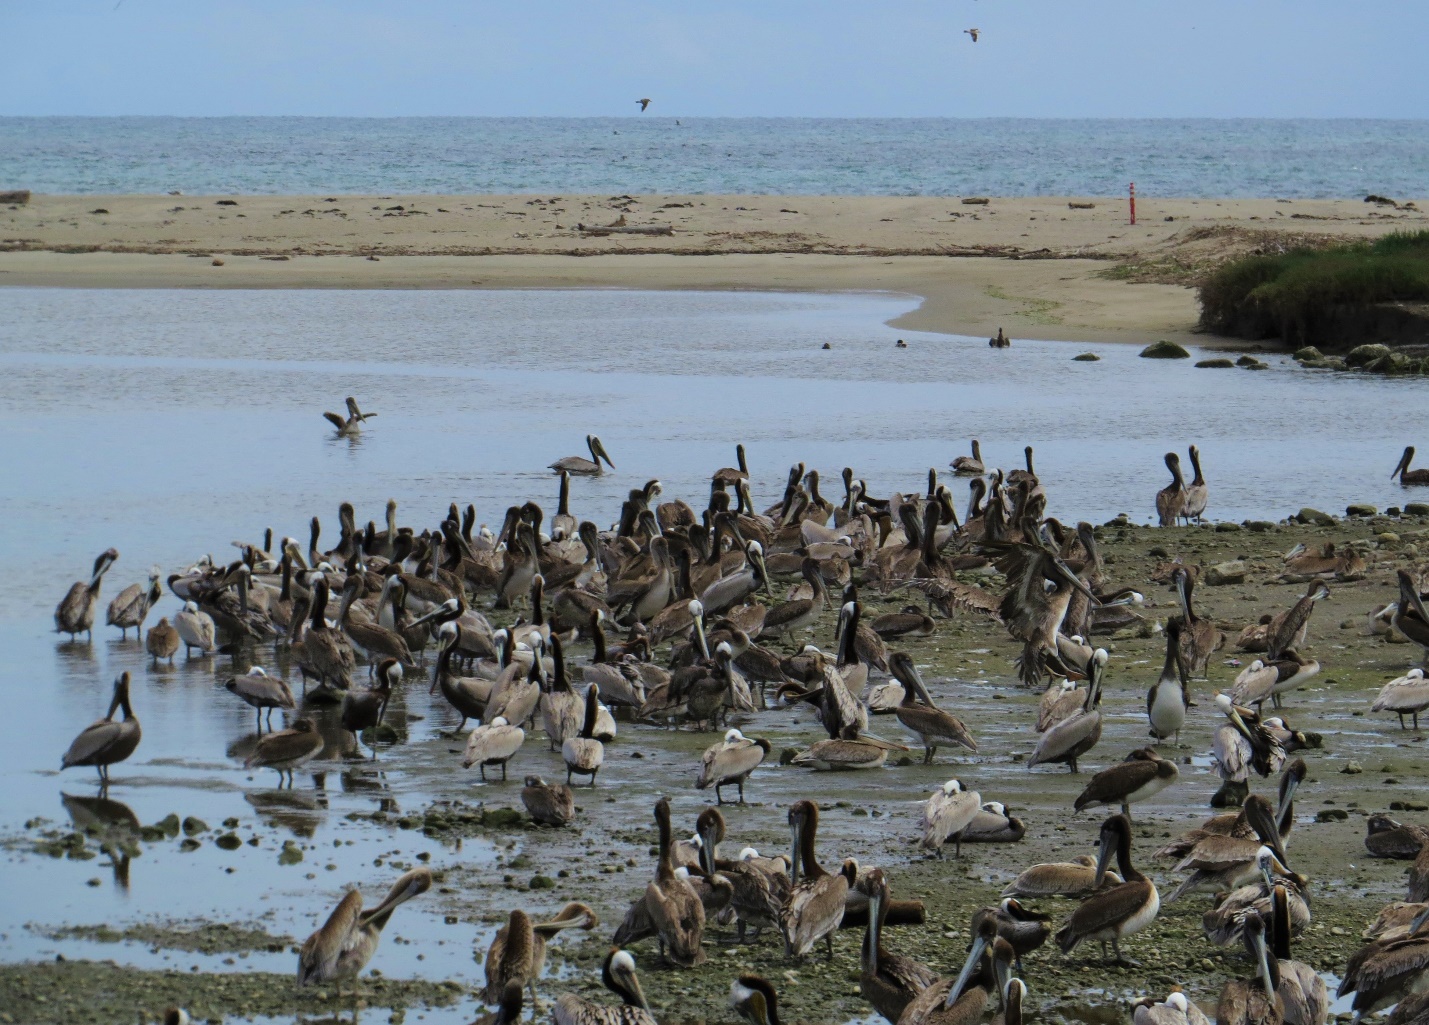 A large group of birds on a beach

Description automatically generated with medium confidence